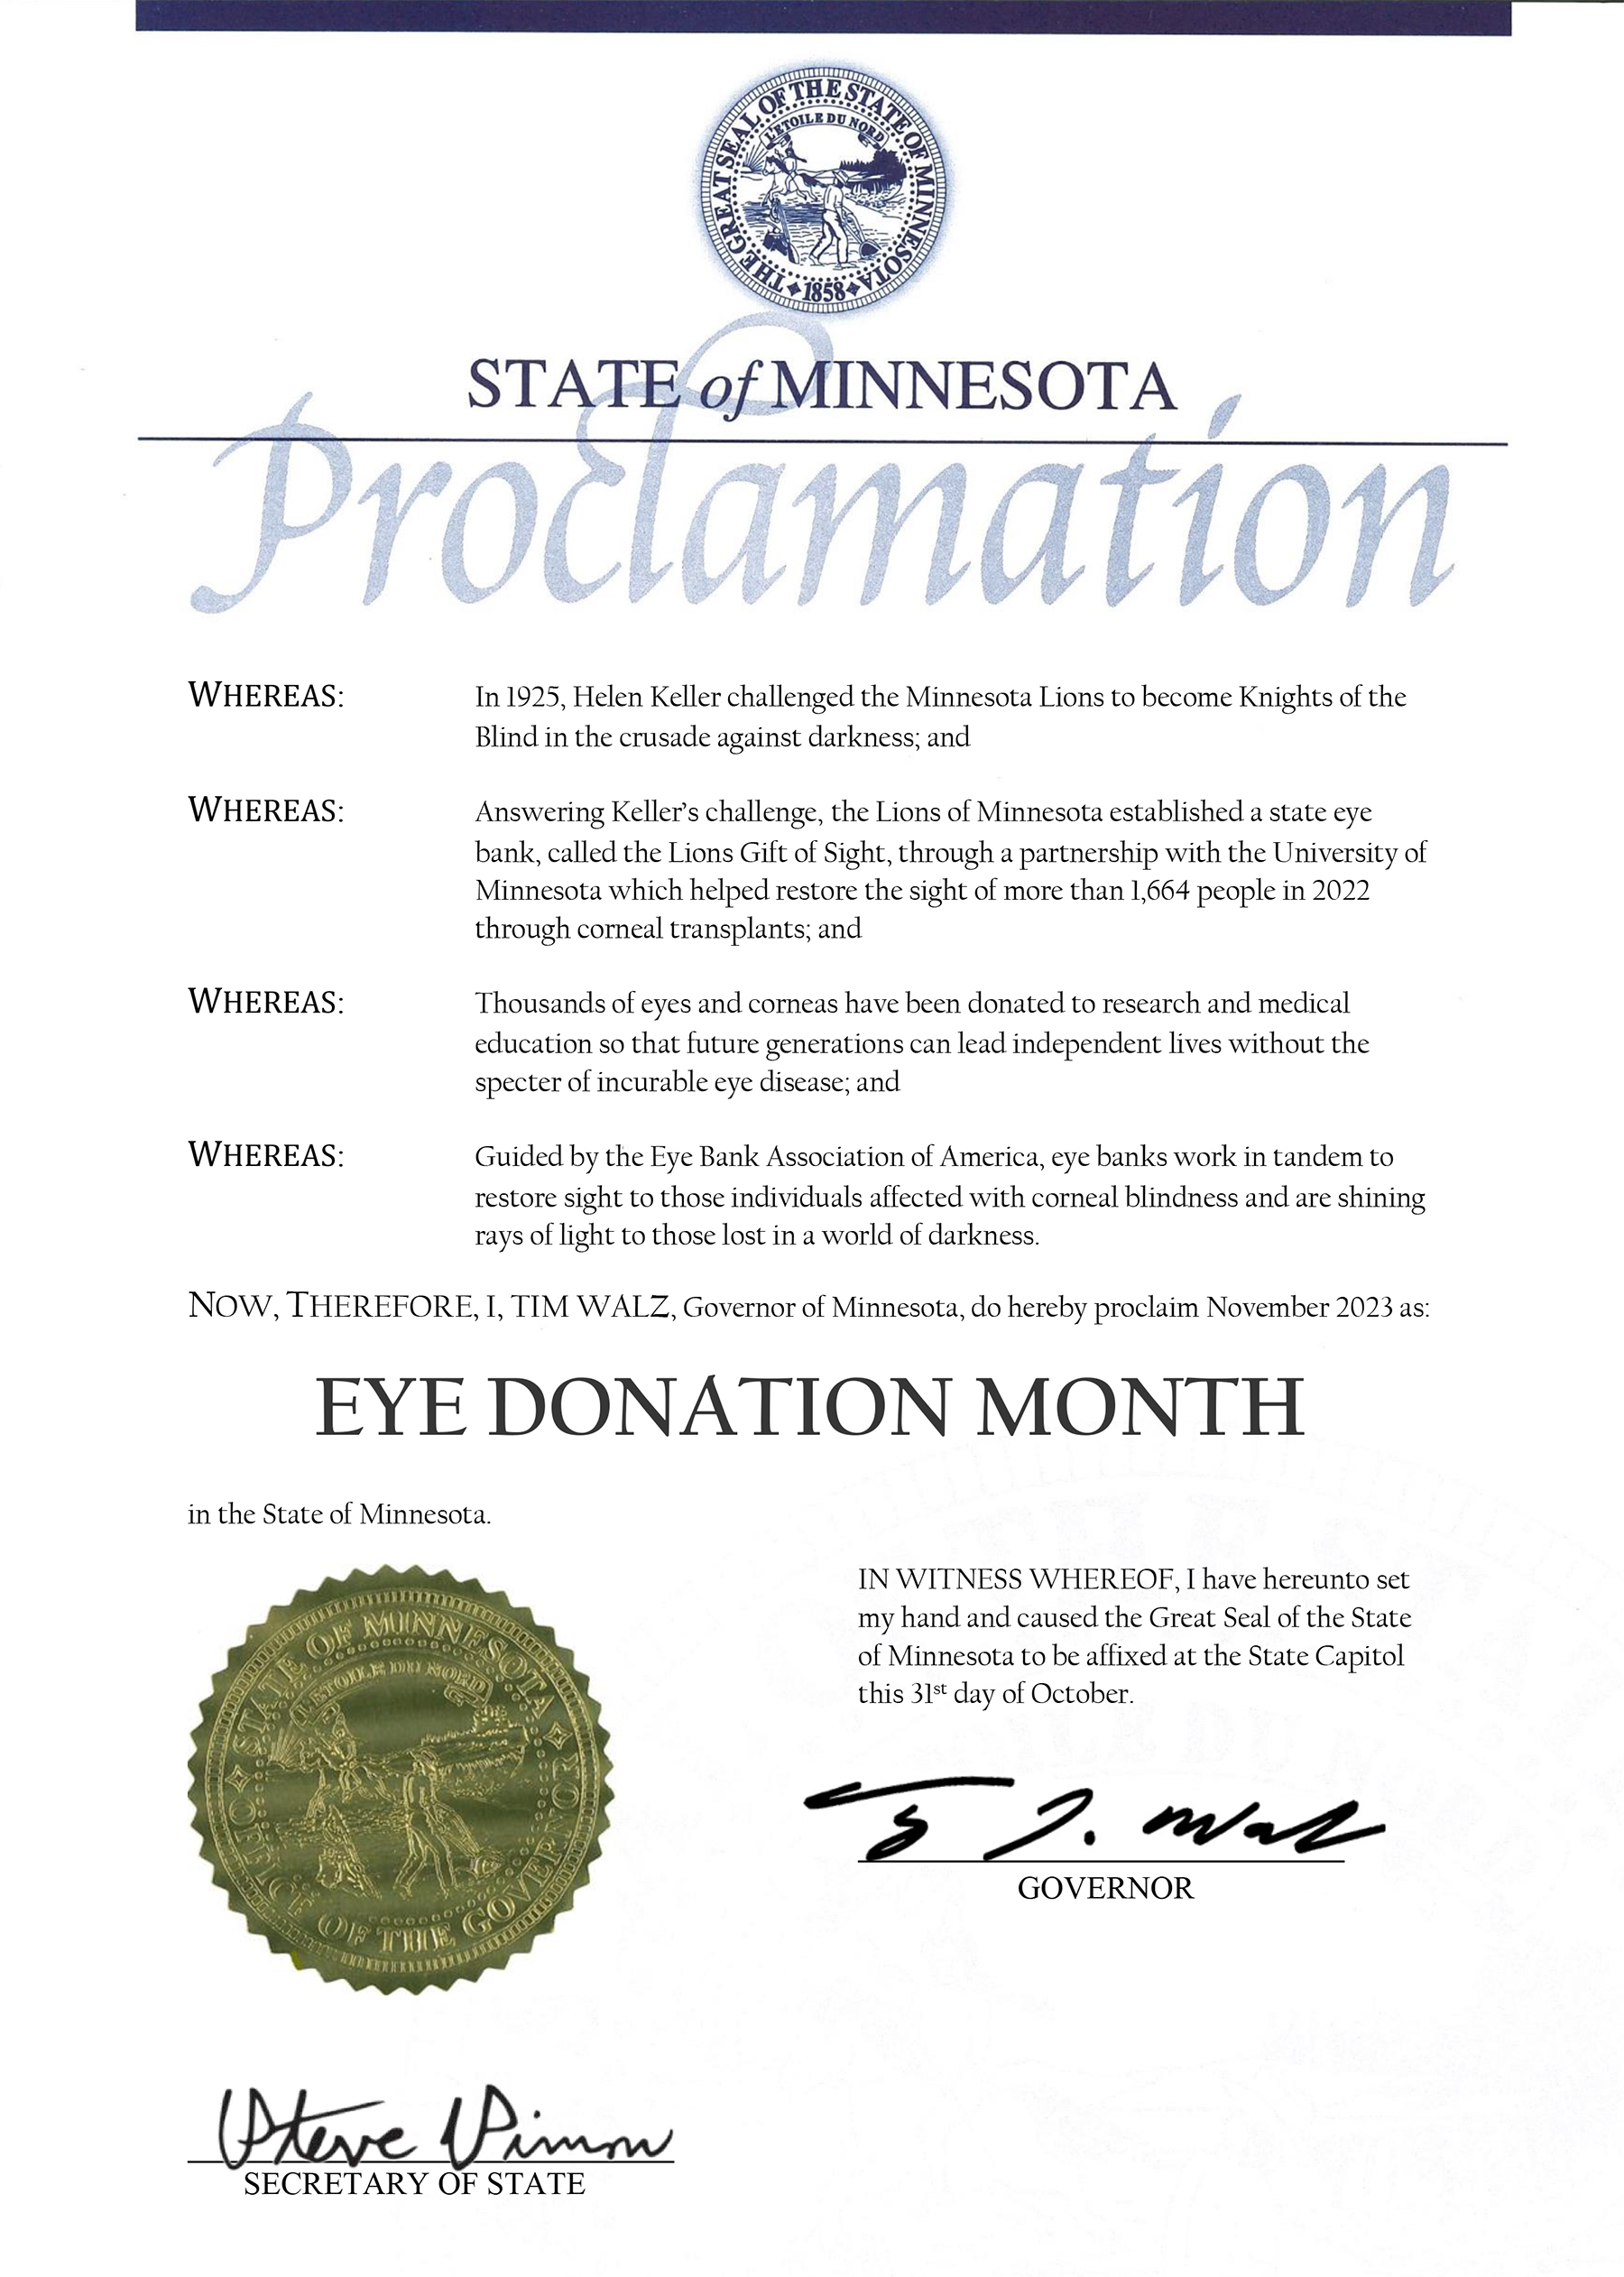 Image of official eye donation month proclamation